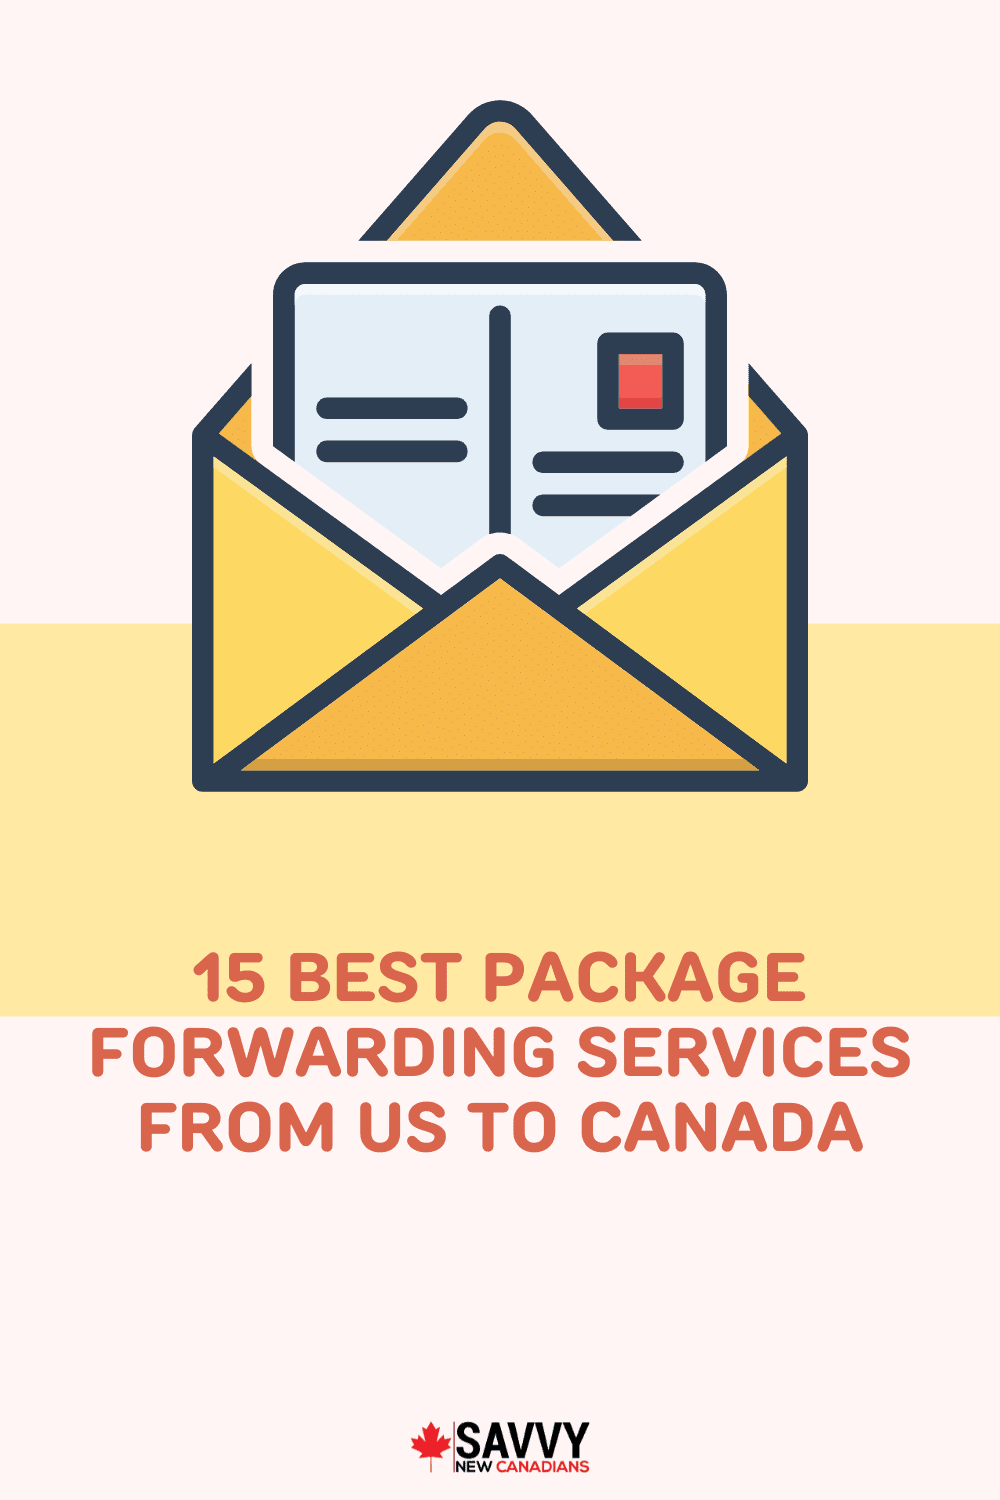 15 Best Package Forwarding Services From US to Canada for 2022